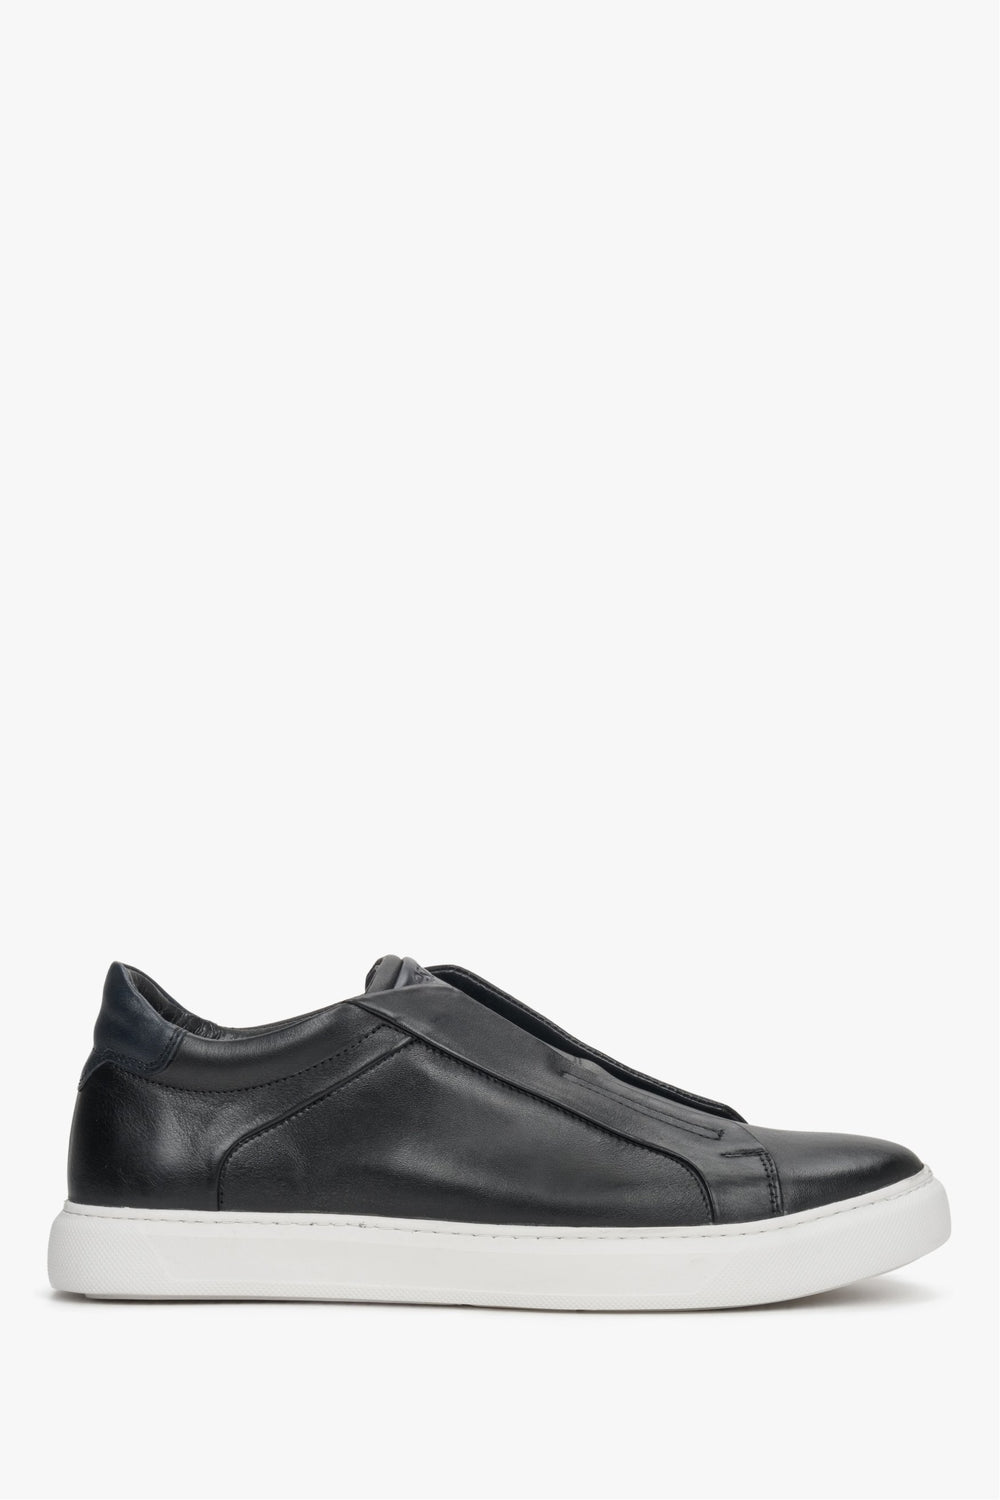 Slip-on men's sneakers made of genuine leather in black by Estro - shoe profile.